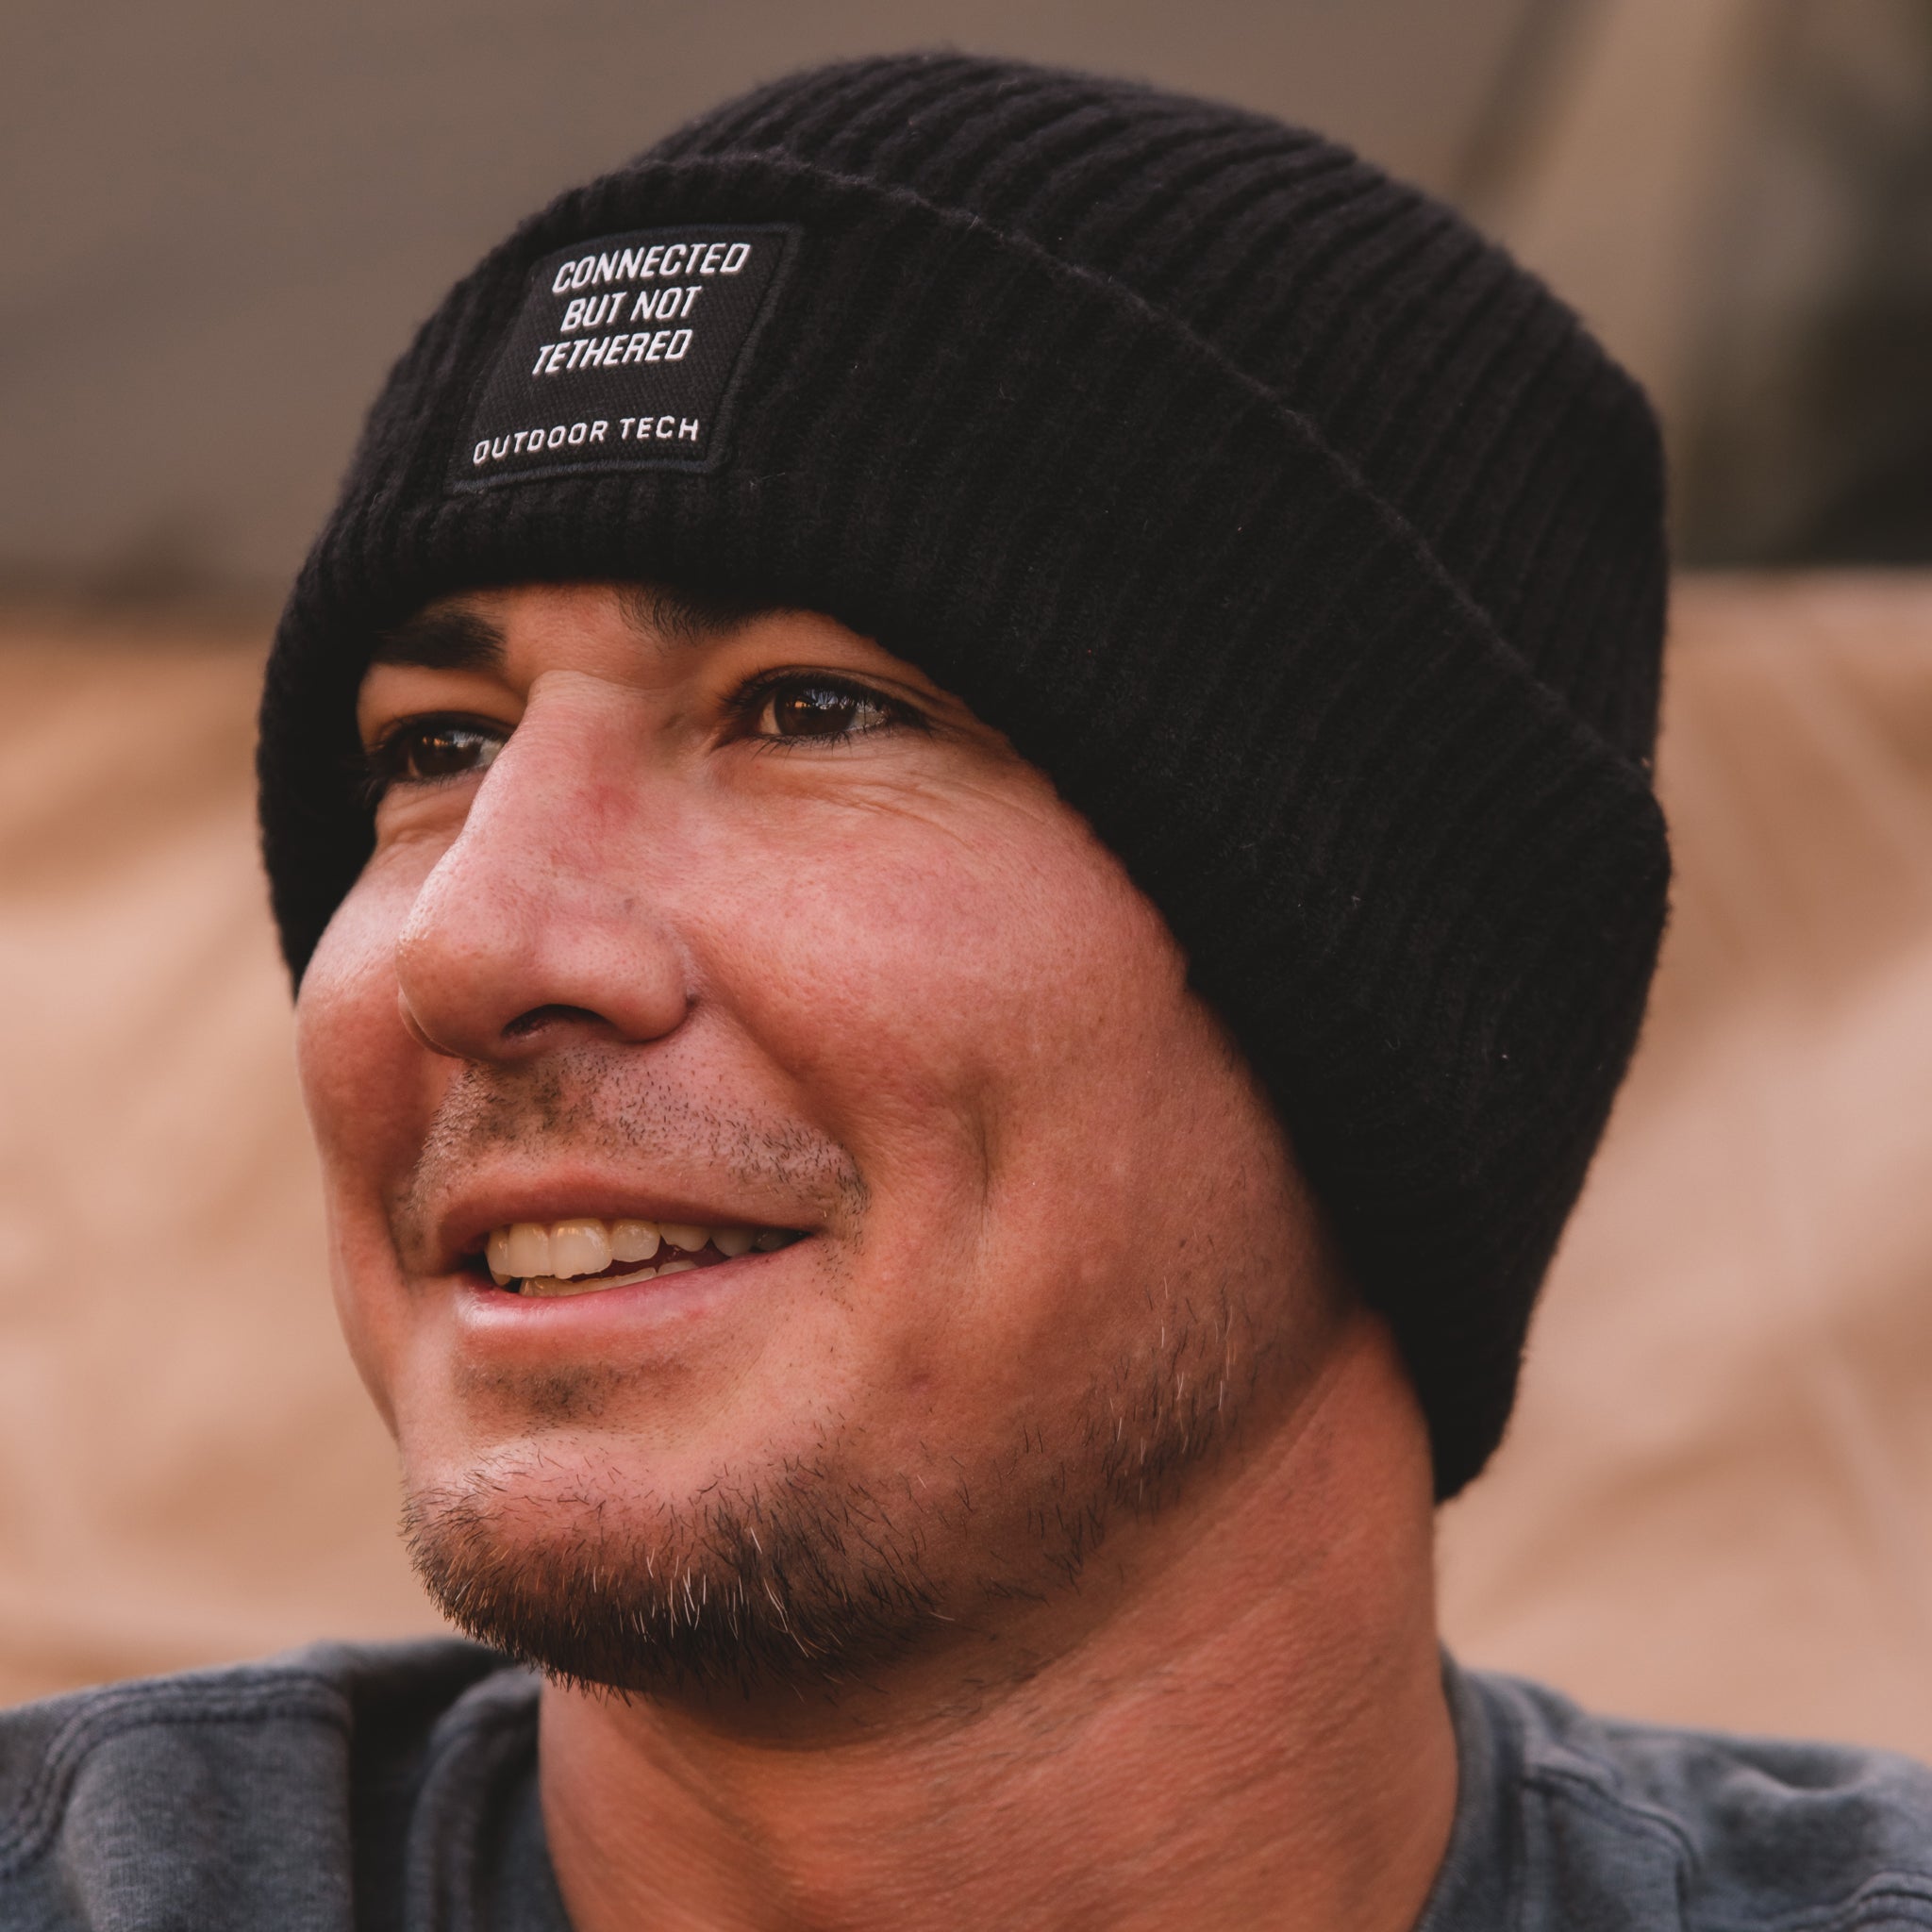 Image of a man smiling and wearing the Shred Beanie, with the path "Connected but not tethered" on the front.